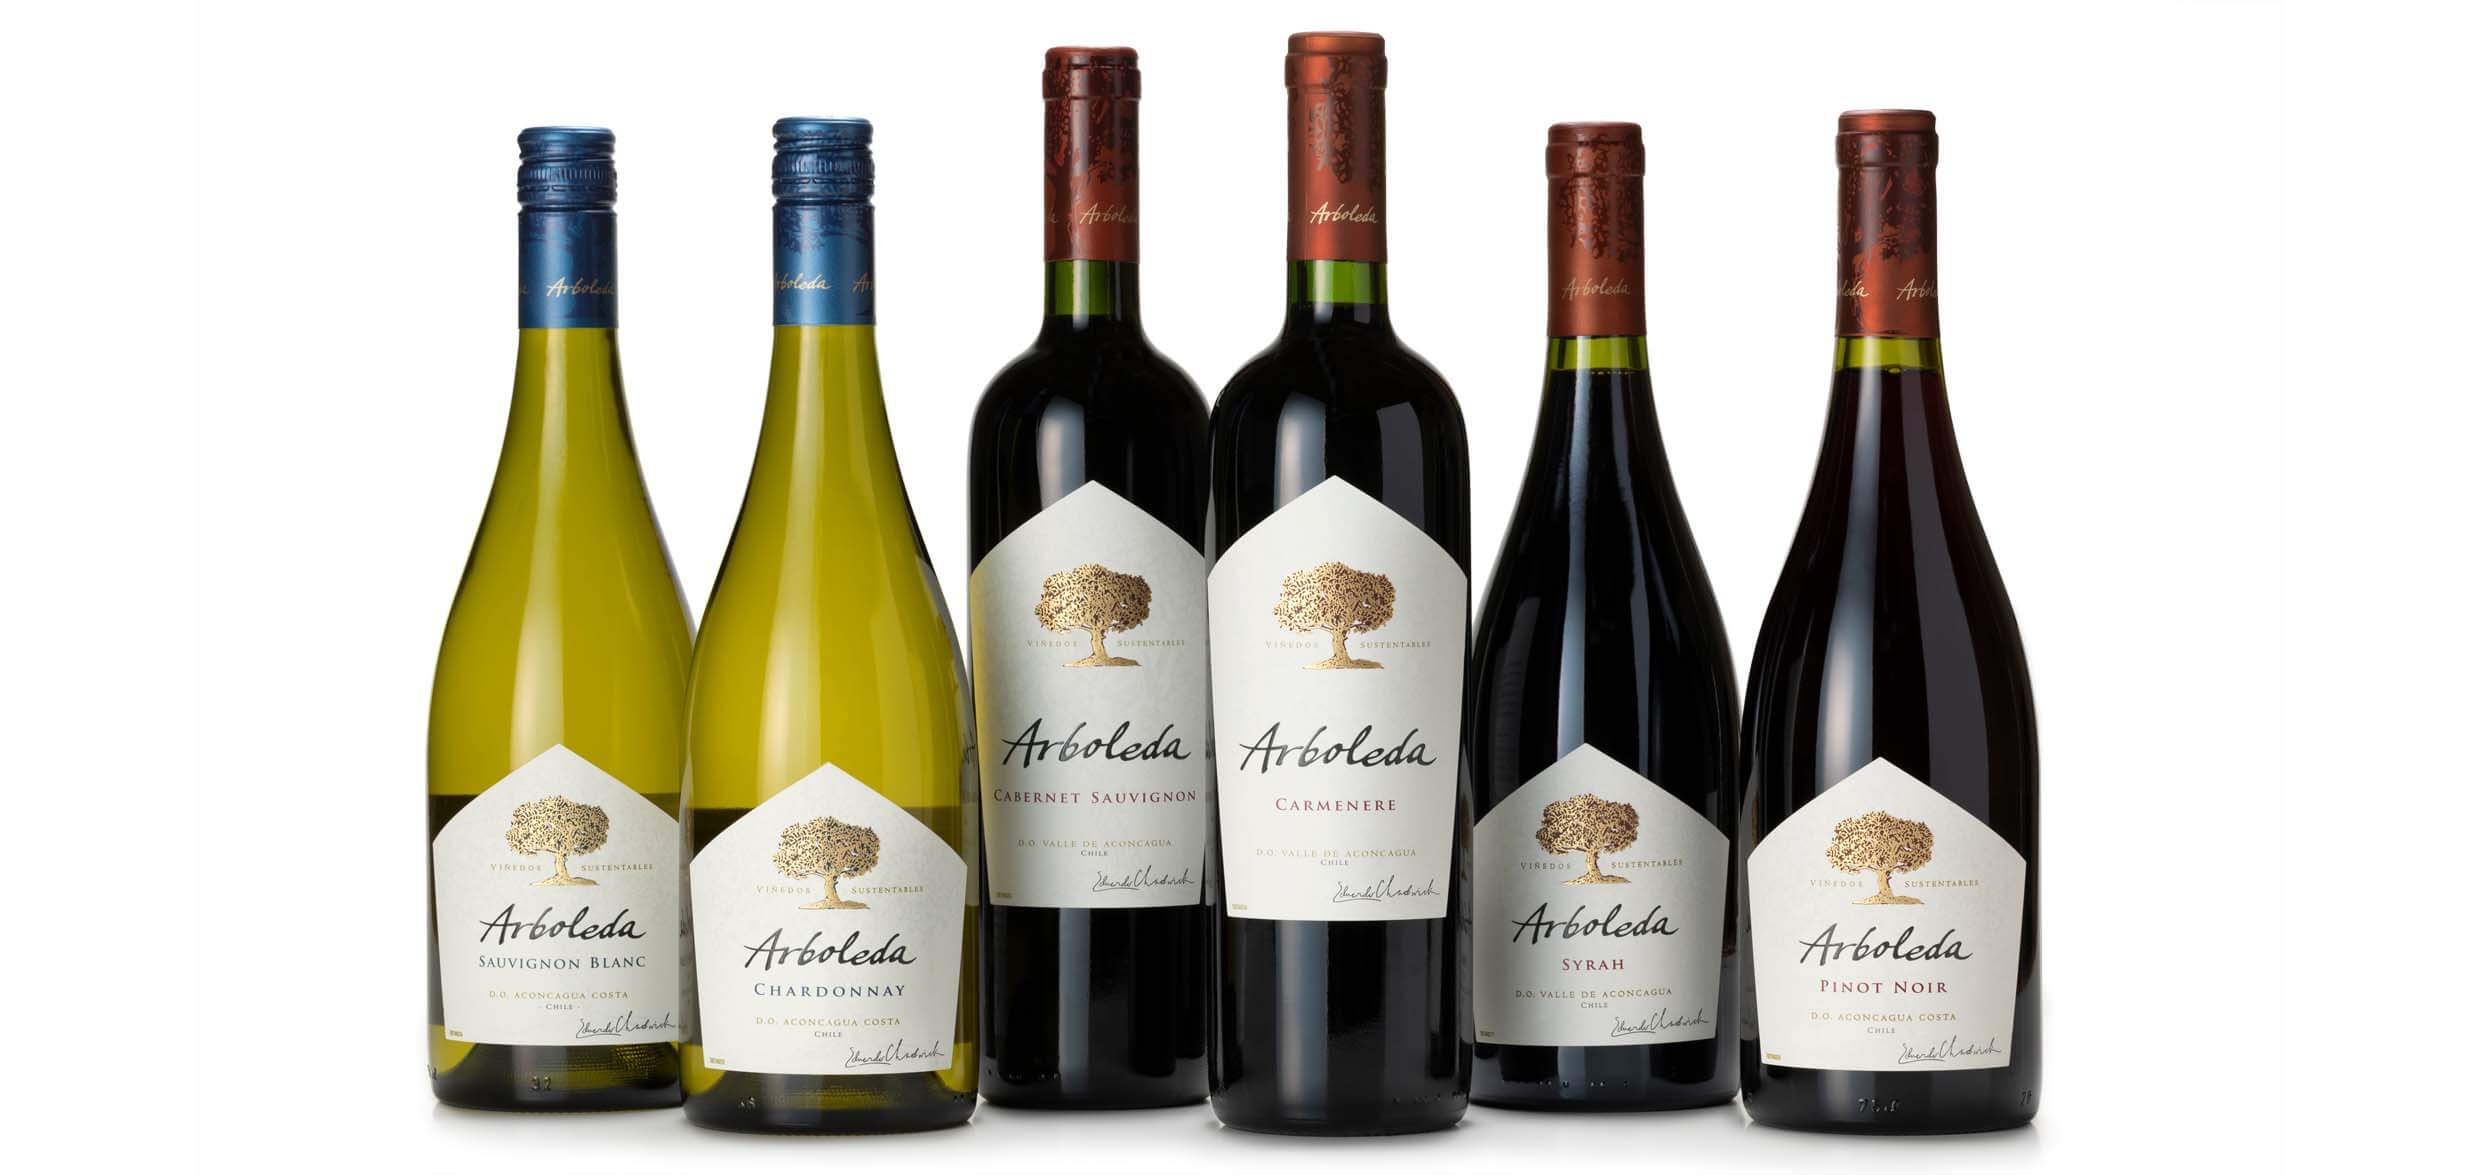 A row of Arboleda bottles on a white background. Two white wines and four red wines.